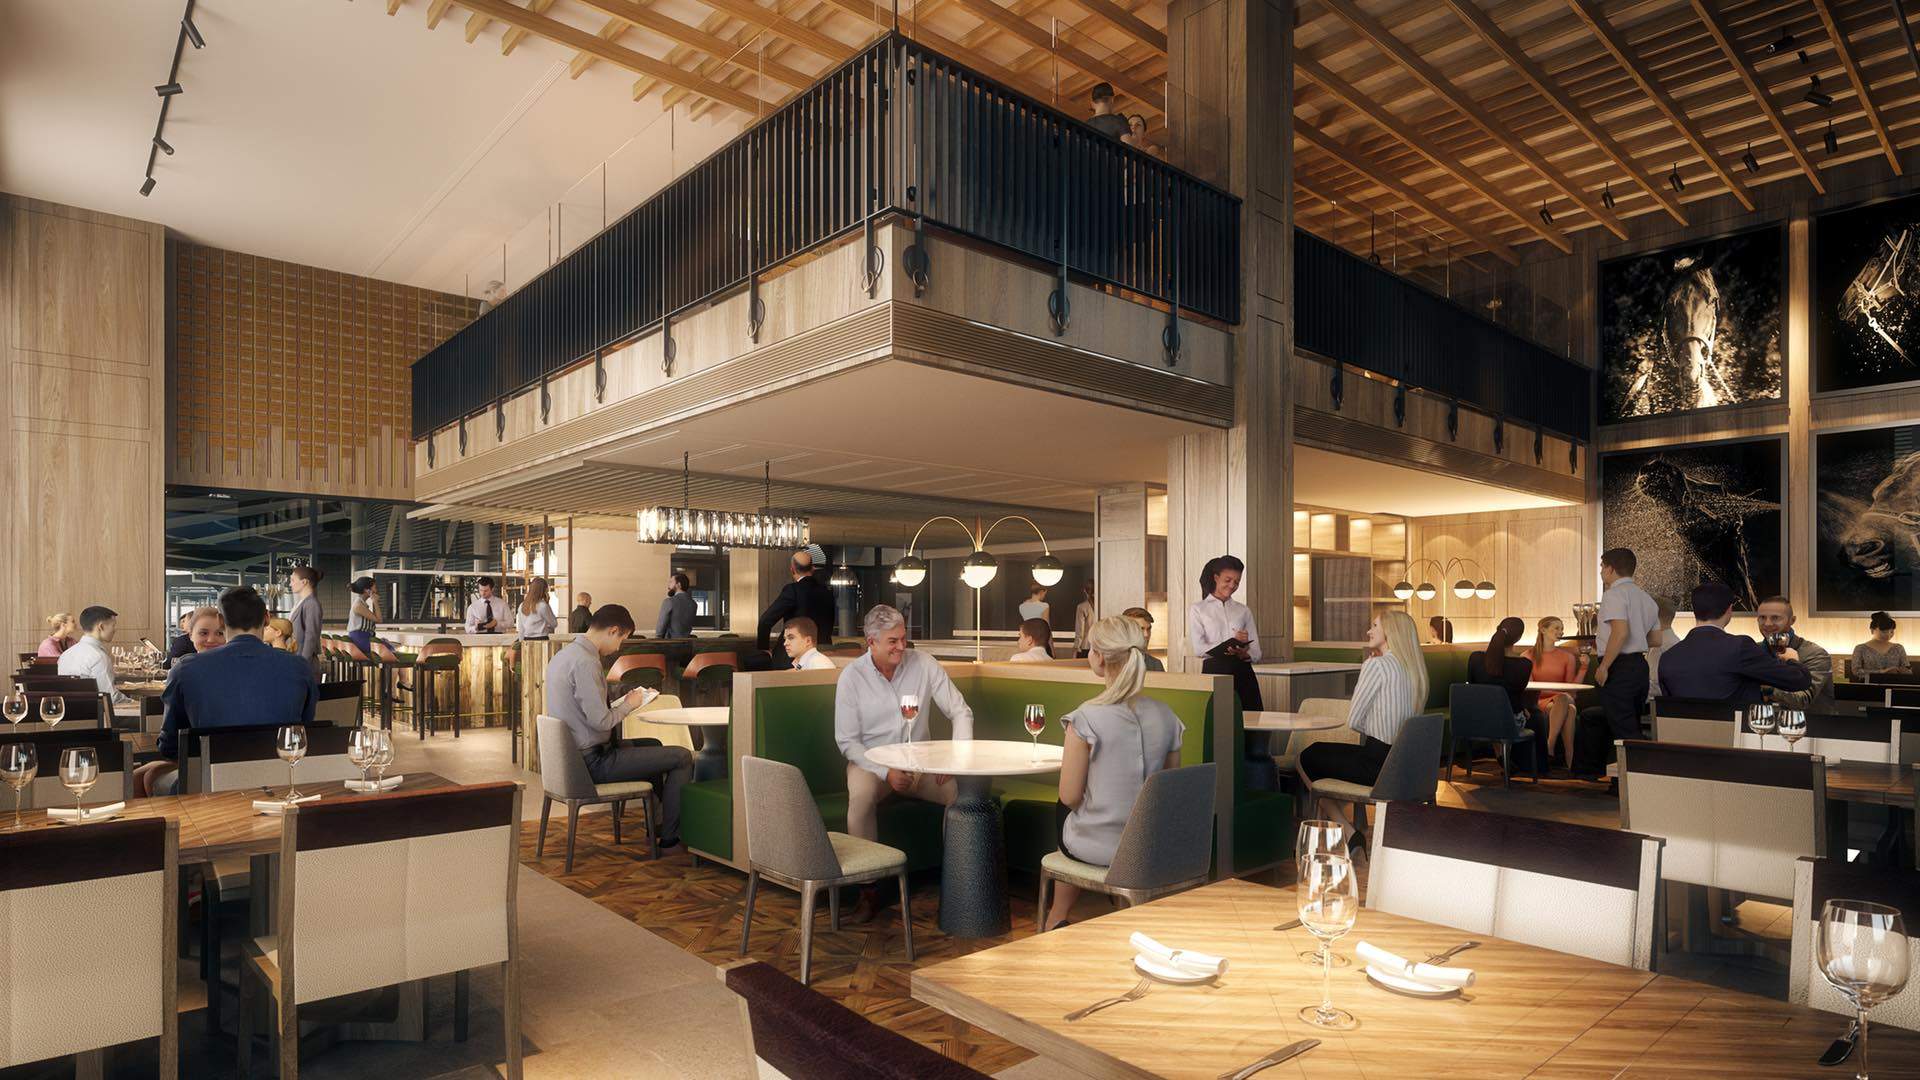 Western Sydney Is Getting a New Five-Star Hotel, Whisky Room and Rooftop Bar